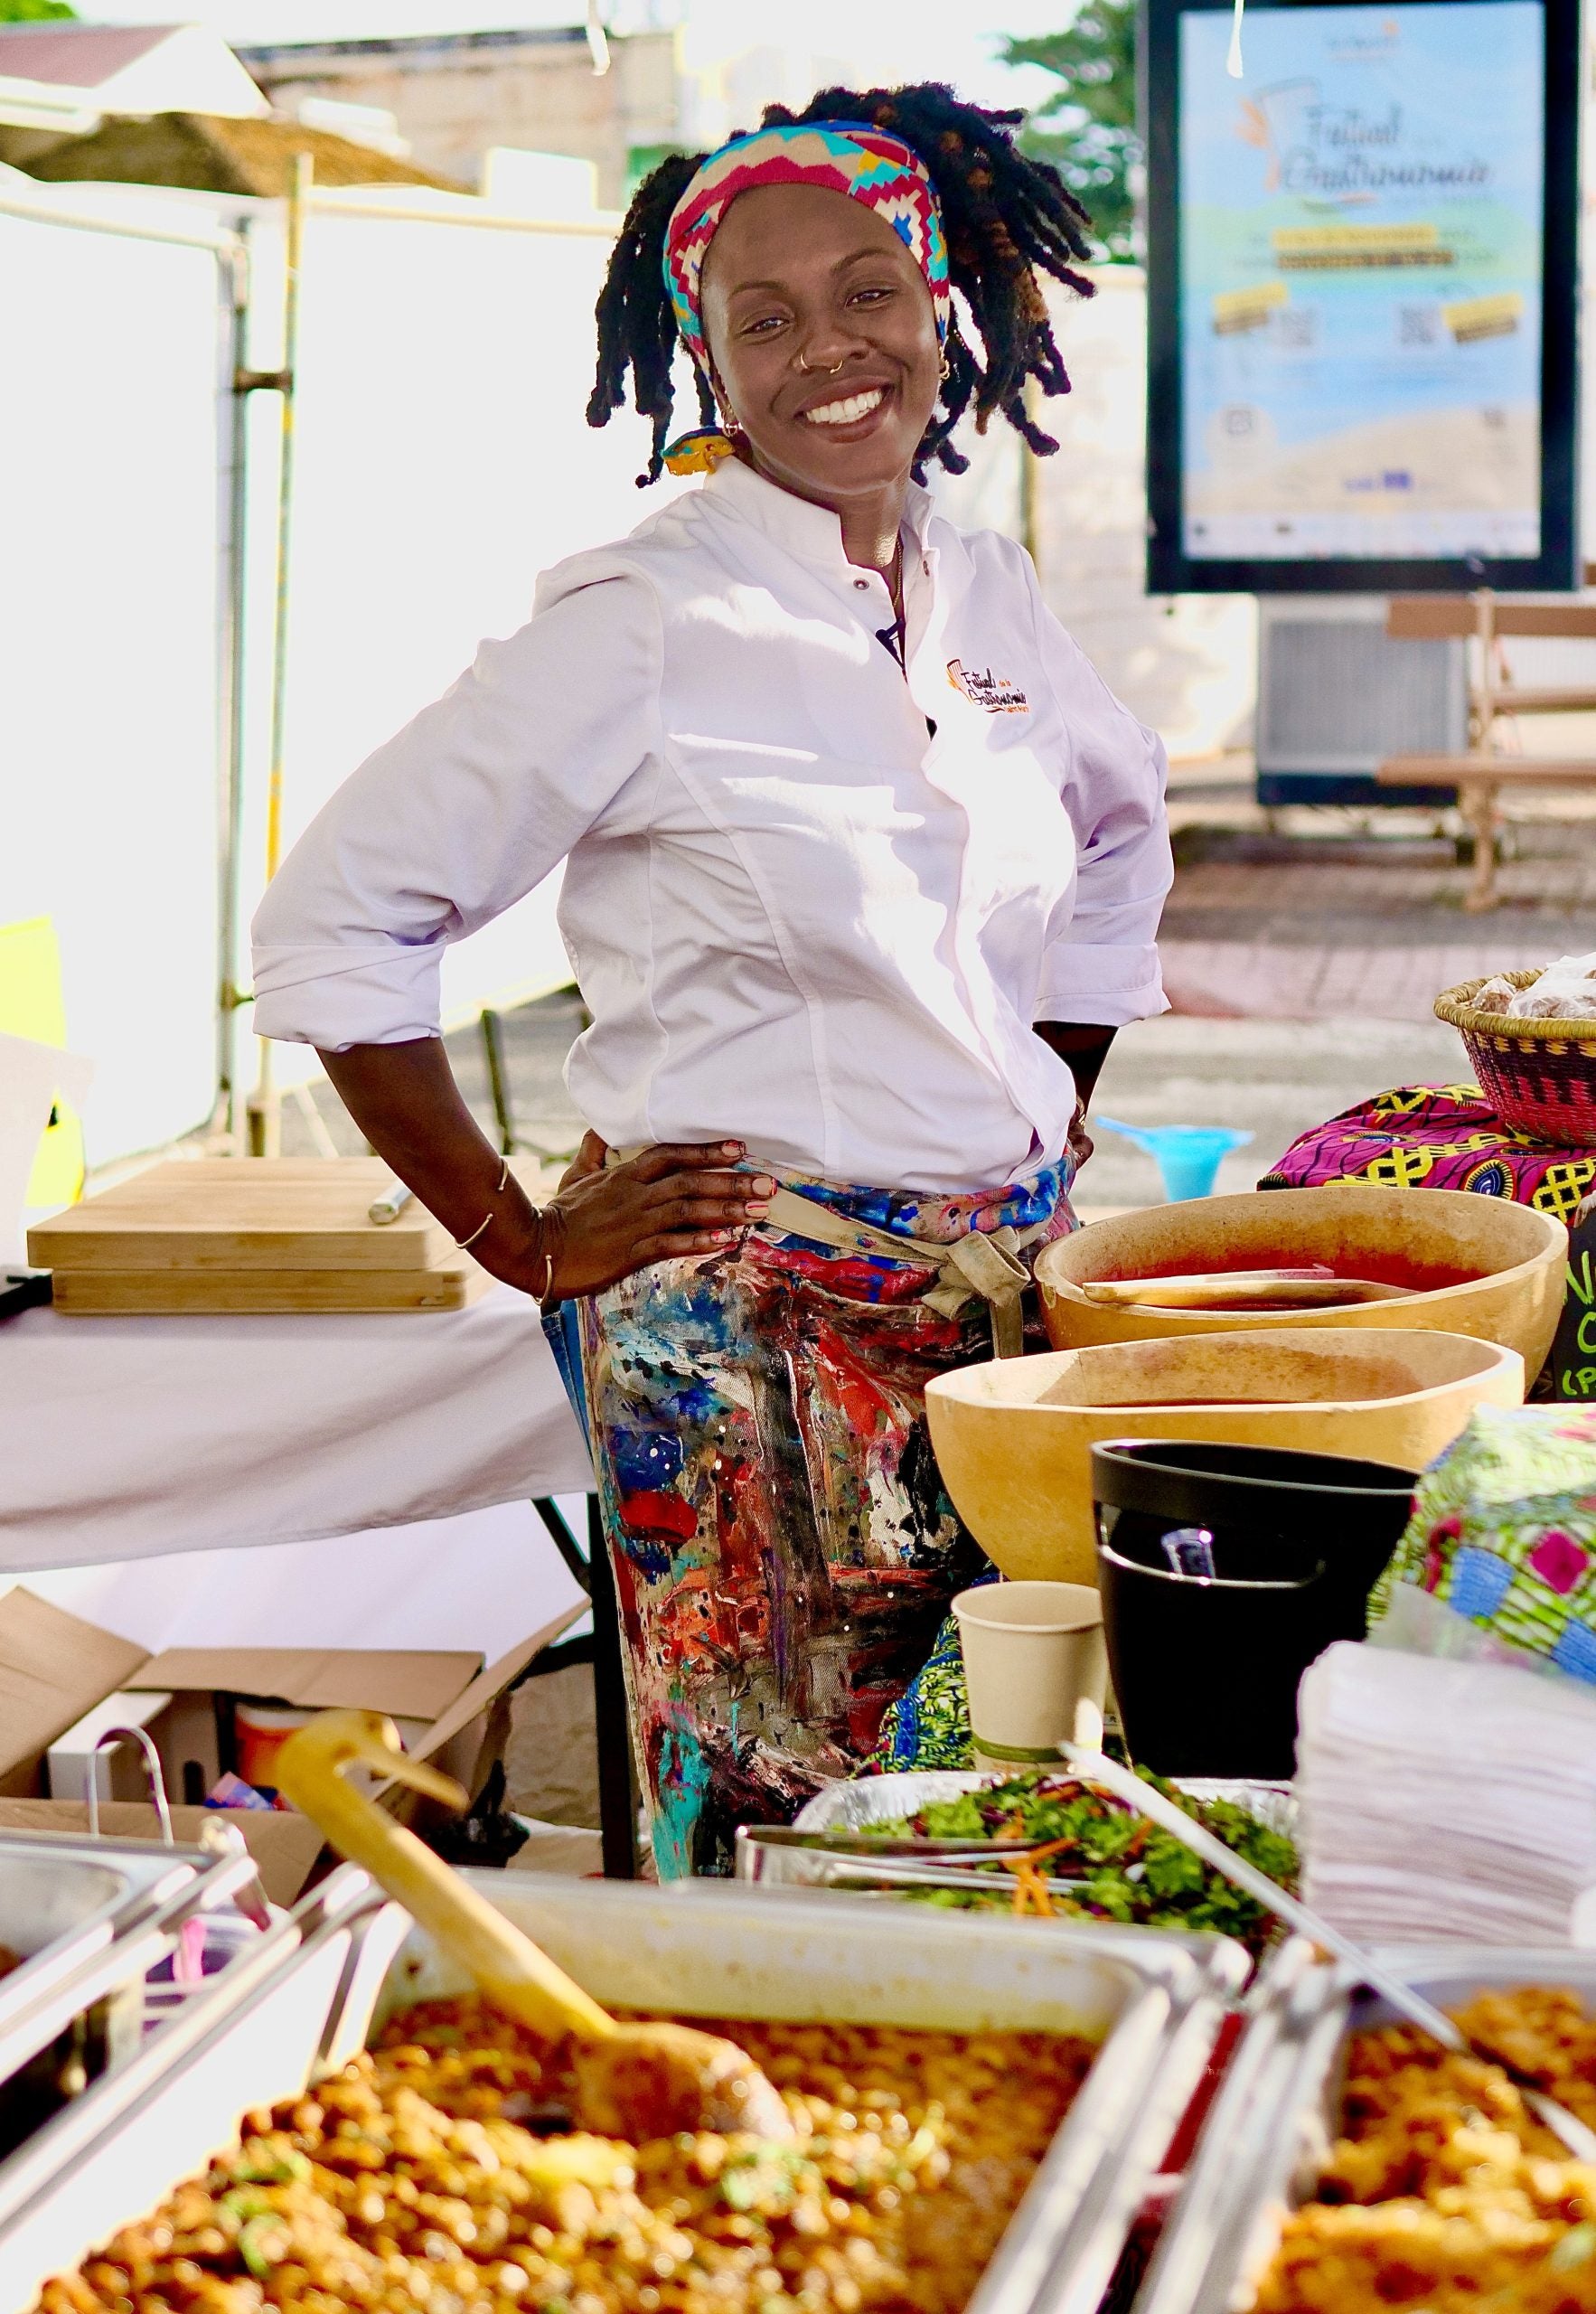 This Food Festival Is Taking Over The Caribbean.  Meet The Black Chefs Showcasing Their Skills And Connecting Communities